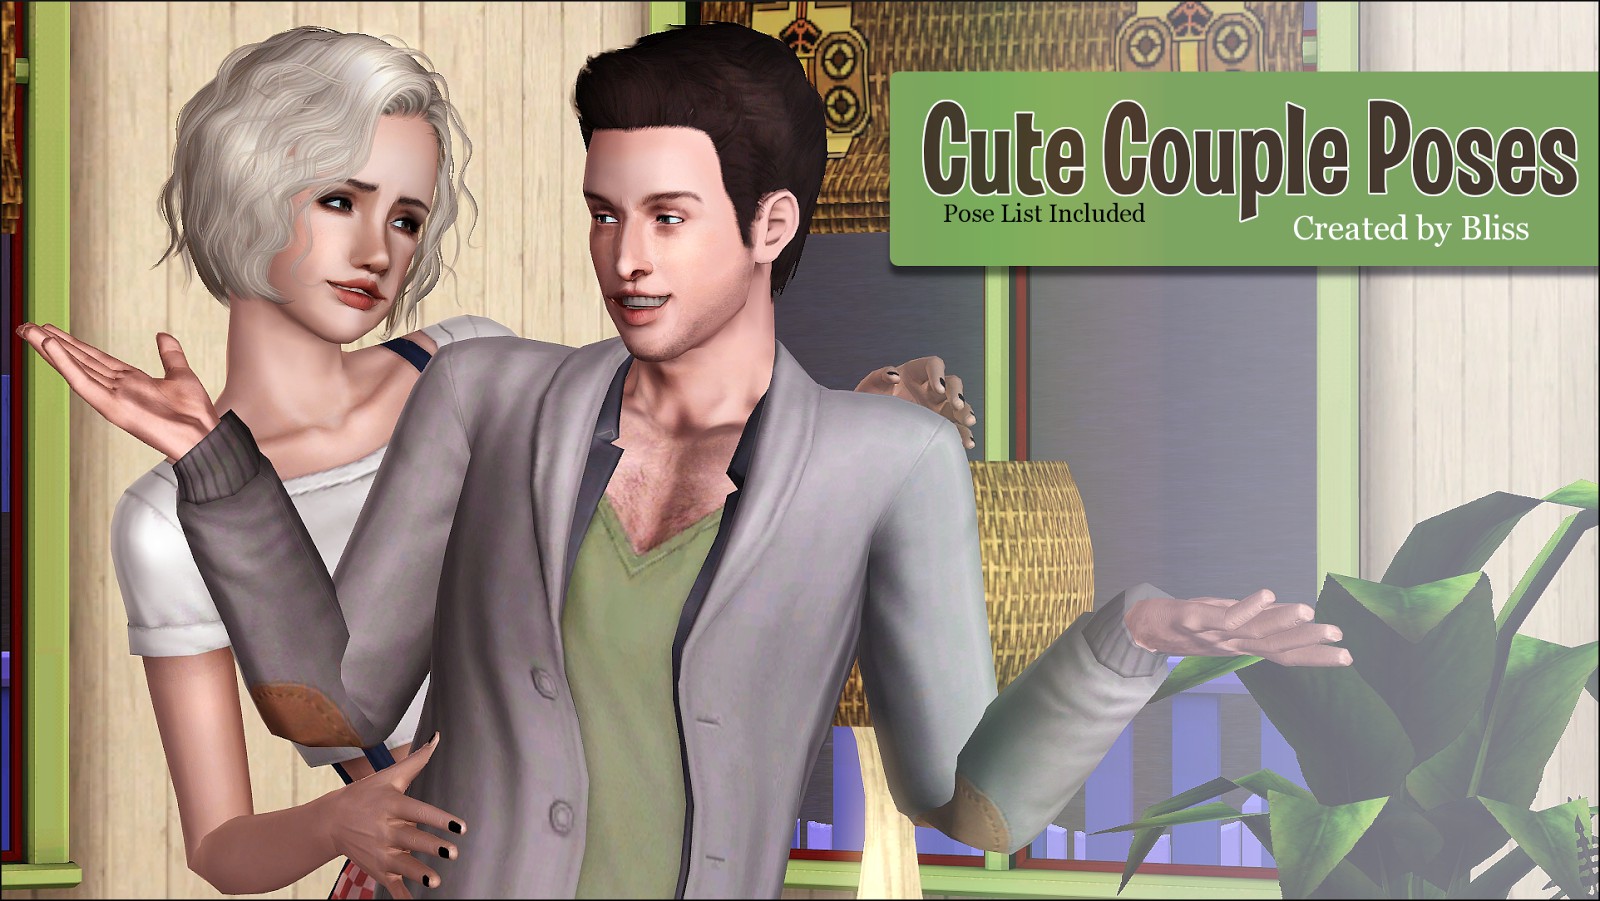 Couple poses by rising_moon_ - The Sims 4 Download - SimsFinds.com